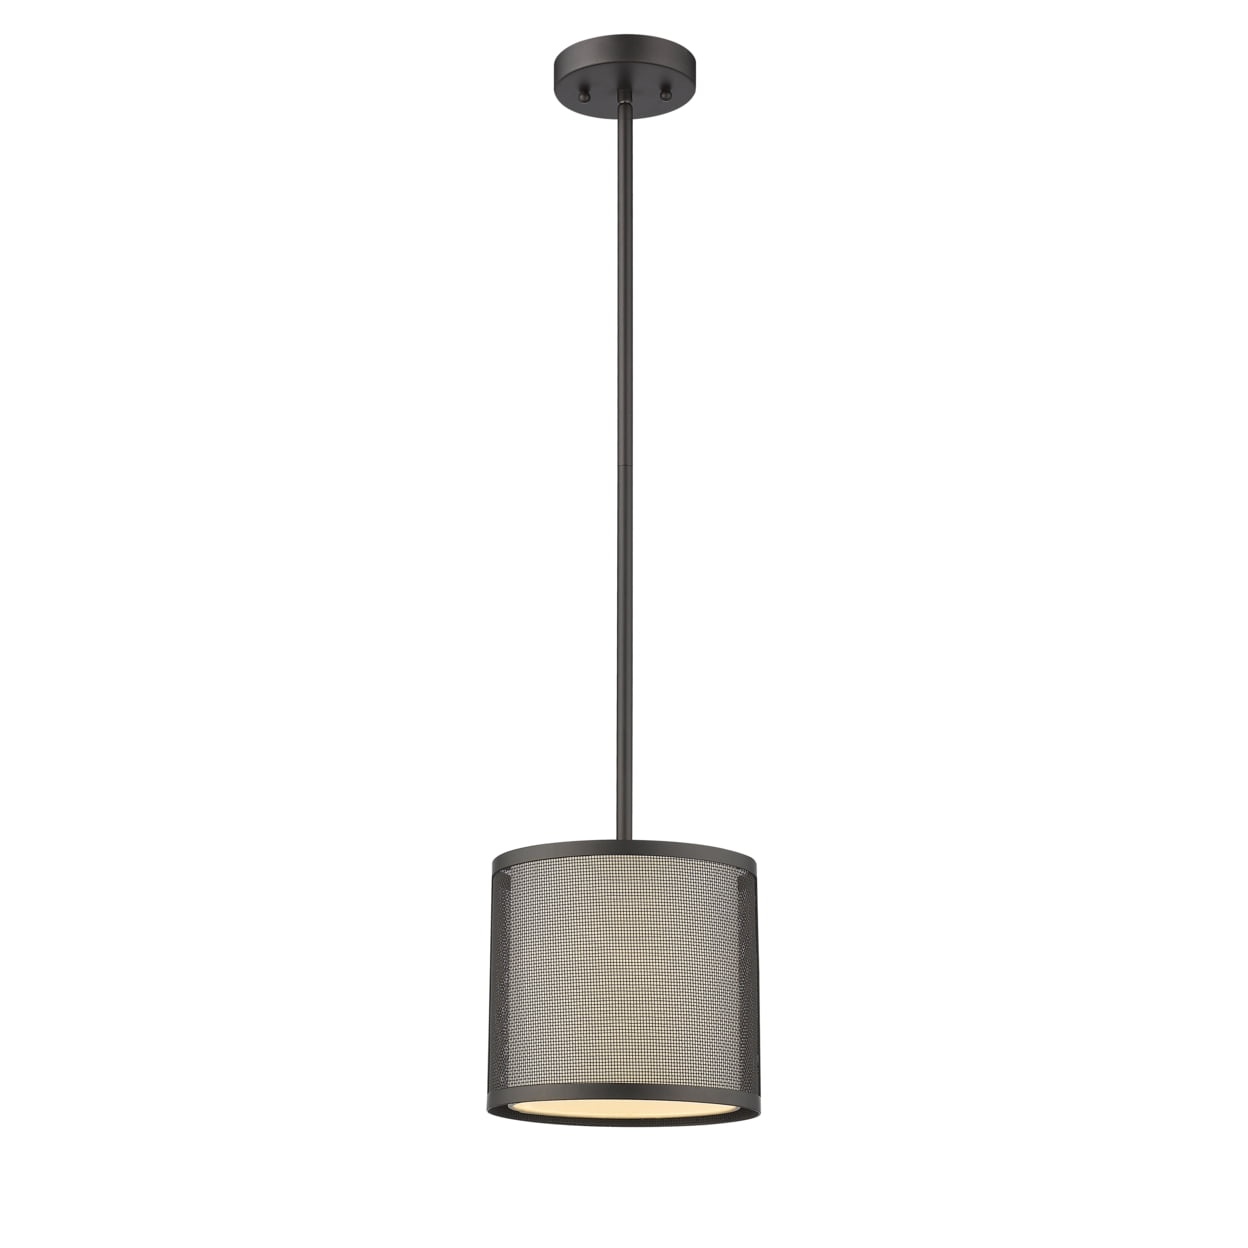 Ch2s005rb08-dp1 Juliana Transitional 1 Light Rubbed Bronze Mini Ceiling Pendant - 8 In.